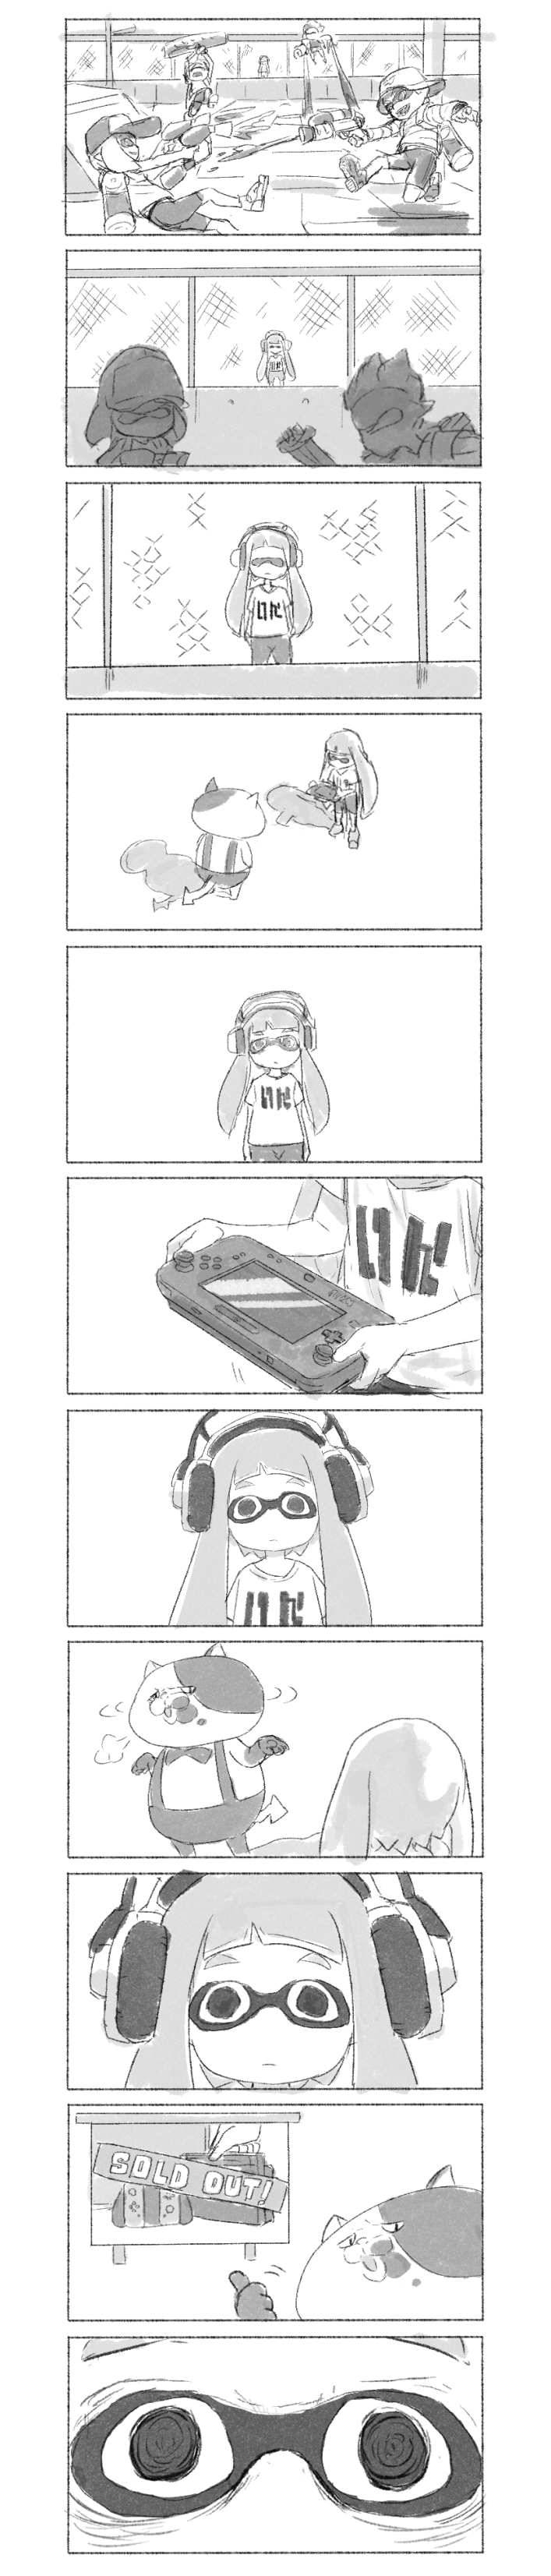 2boys 3girls :| absurdres baseball_cap battle bionekojita bow bowtie cat chain-link_fence close-up closed_mouth comic commentary_request controller domino_mask expressionless eyes fence game_console game_controller greyscale hat headphones highres holding holding_weapon inkling jajji-kun_(splatoon) joy-con long_hair long_image long_sleeves mask monochrome multiple_boys multiple_girls nintendo nintendo_switch nintendo_switch_dock pointing pointy_ears shirt short_hair short_sleeves shorts silent_comic splat_dualies_(splatoon) splat_roller_(splatoon) splatoon splatoon_2 standing suspenders t-shirt tall_image tentacle_hair weapon wii_u wii_u_gamepad